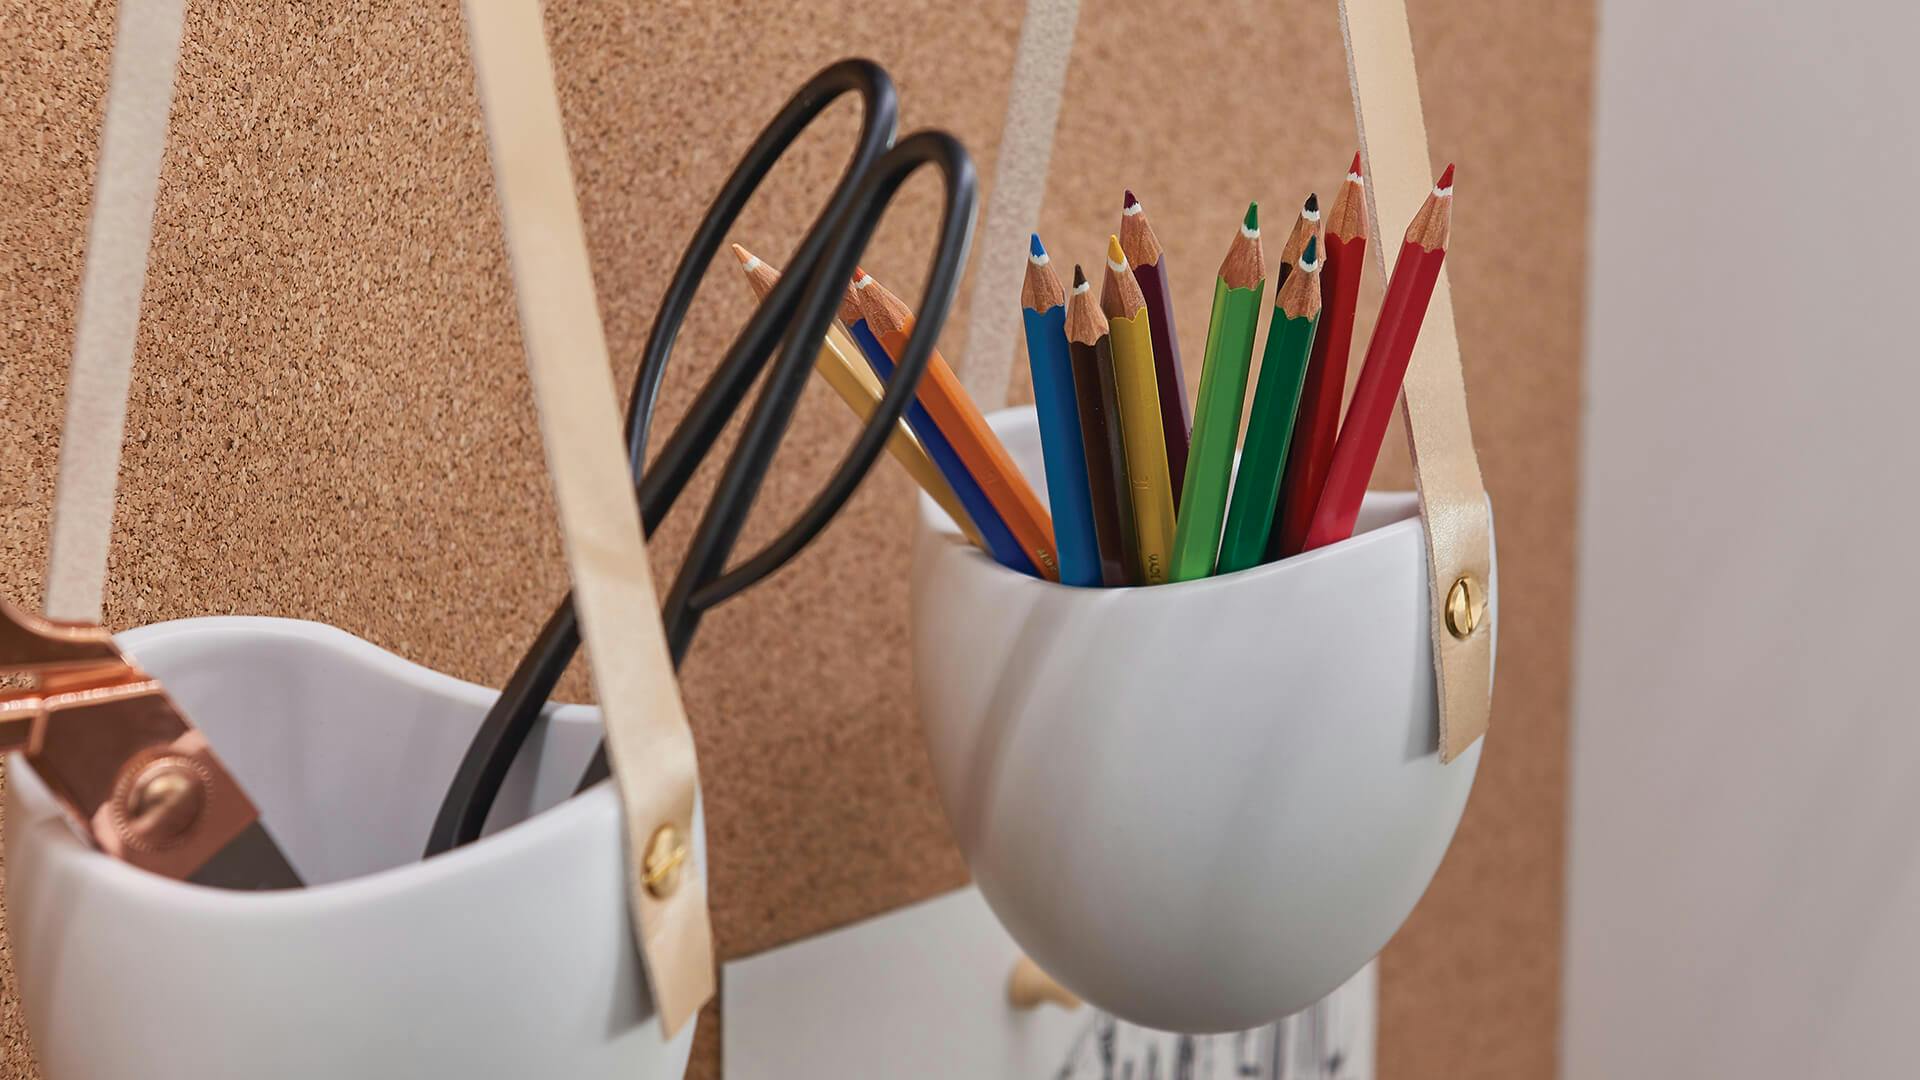 Pencils and scissors in hanging cups against a cork board with a drawing on it